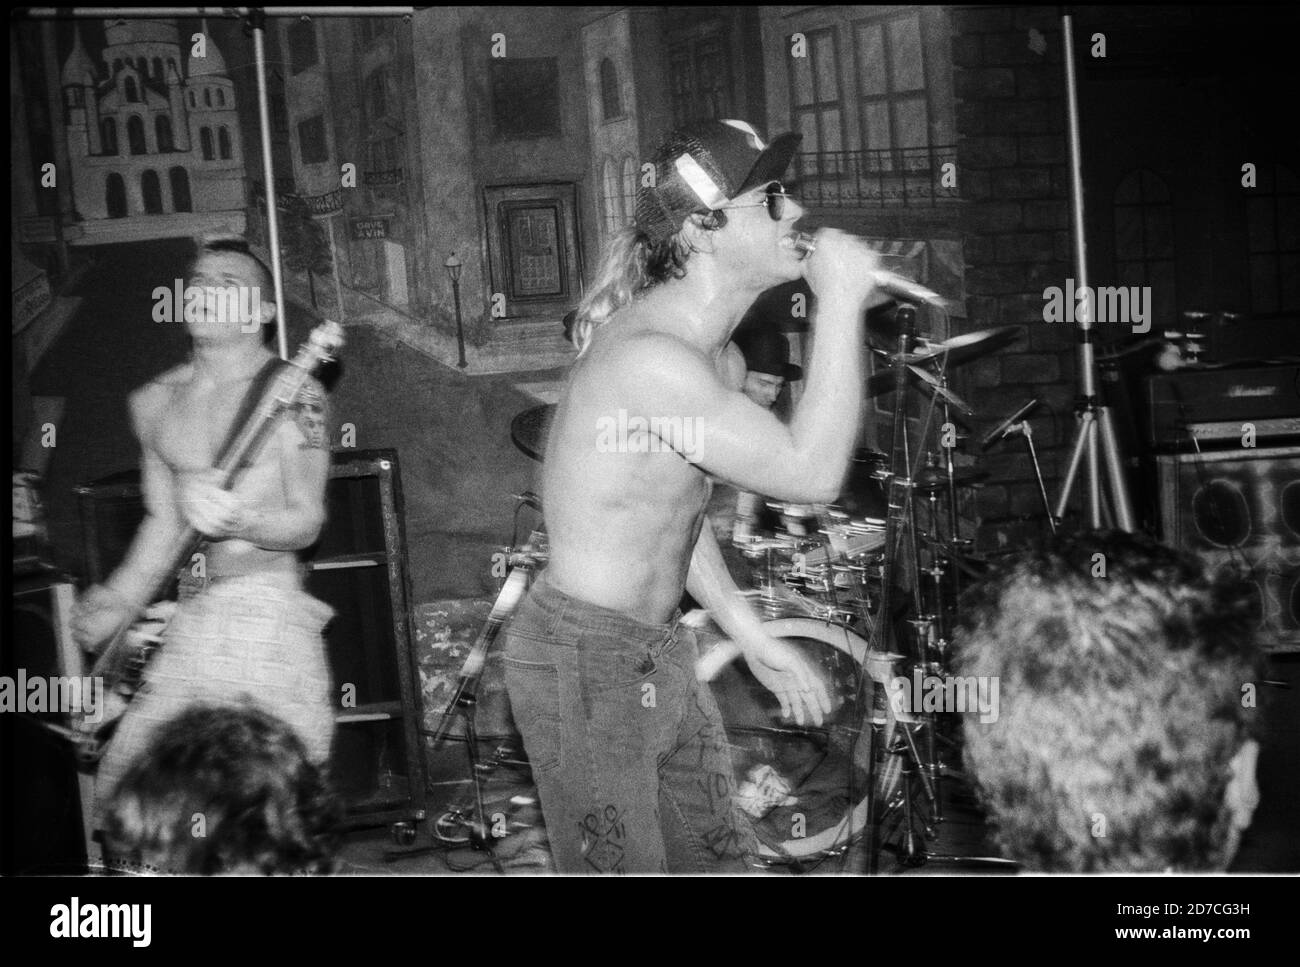 Flea (Peter Michael Balzary, left) and Anthony Kiedis of Red Hot Chili  Peppers performing at the Red Creek Inn, Rochester, NY, USA on November  10th, 1985 Stock Photo - Alamy